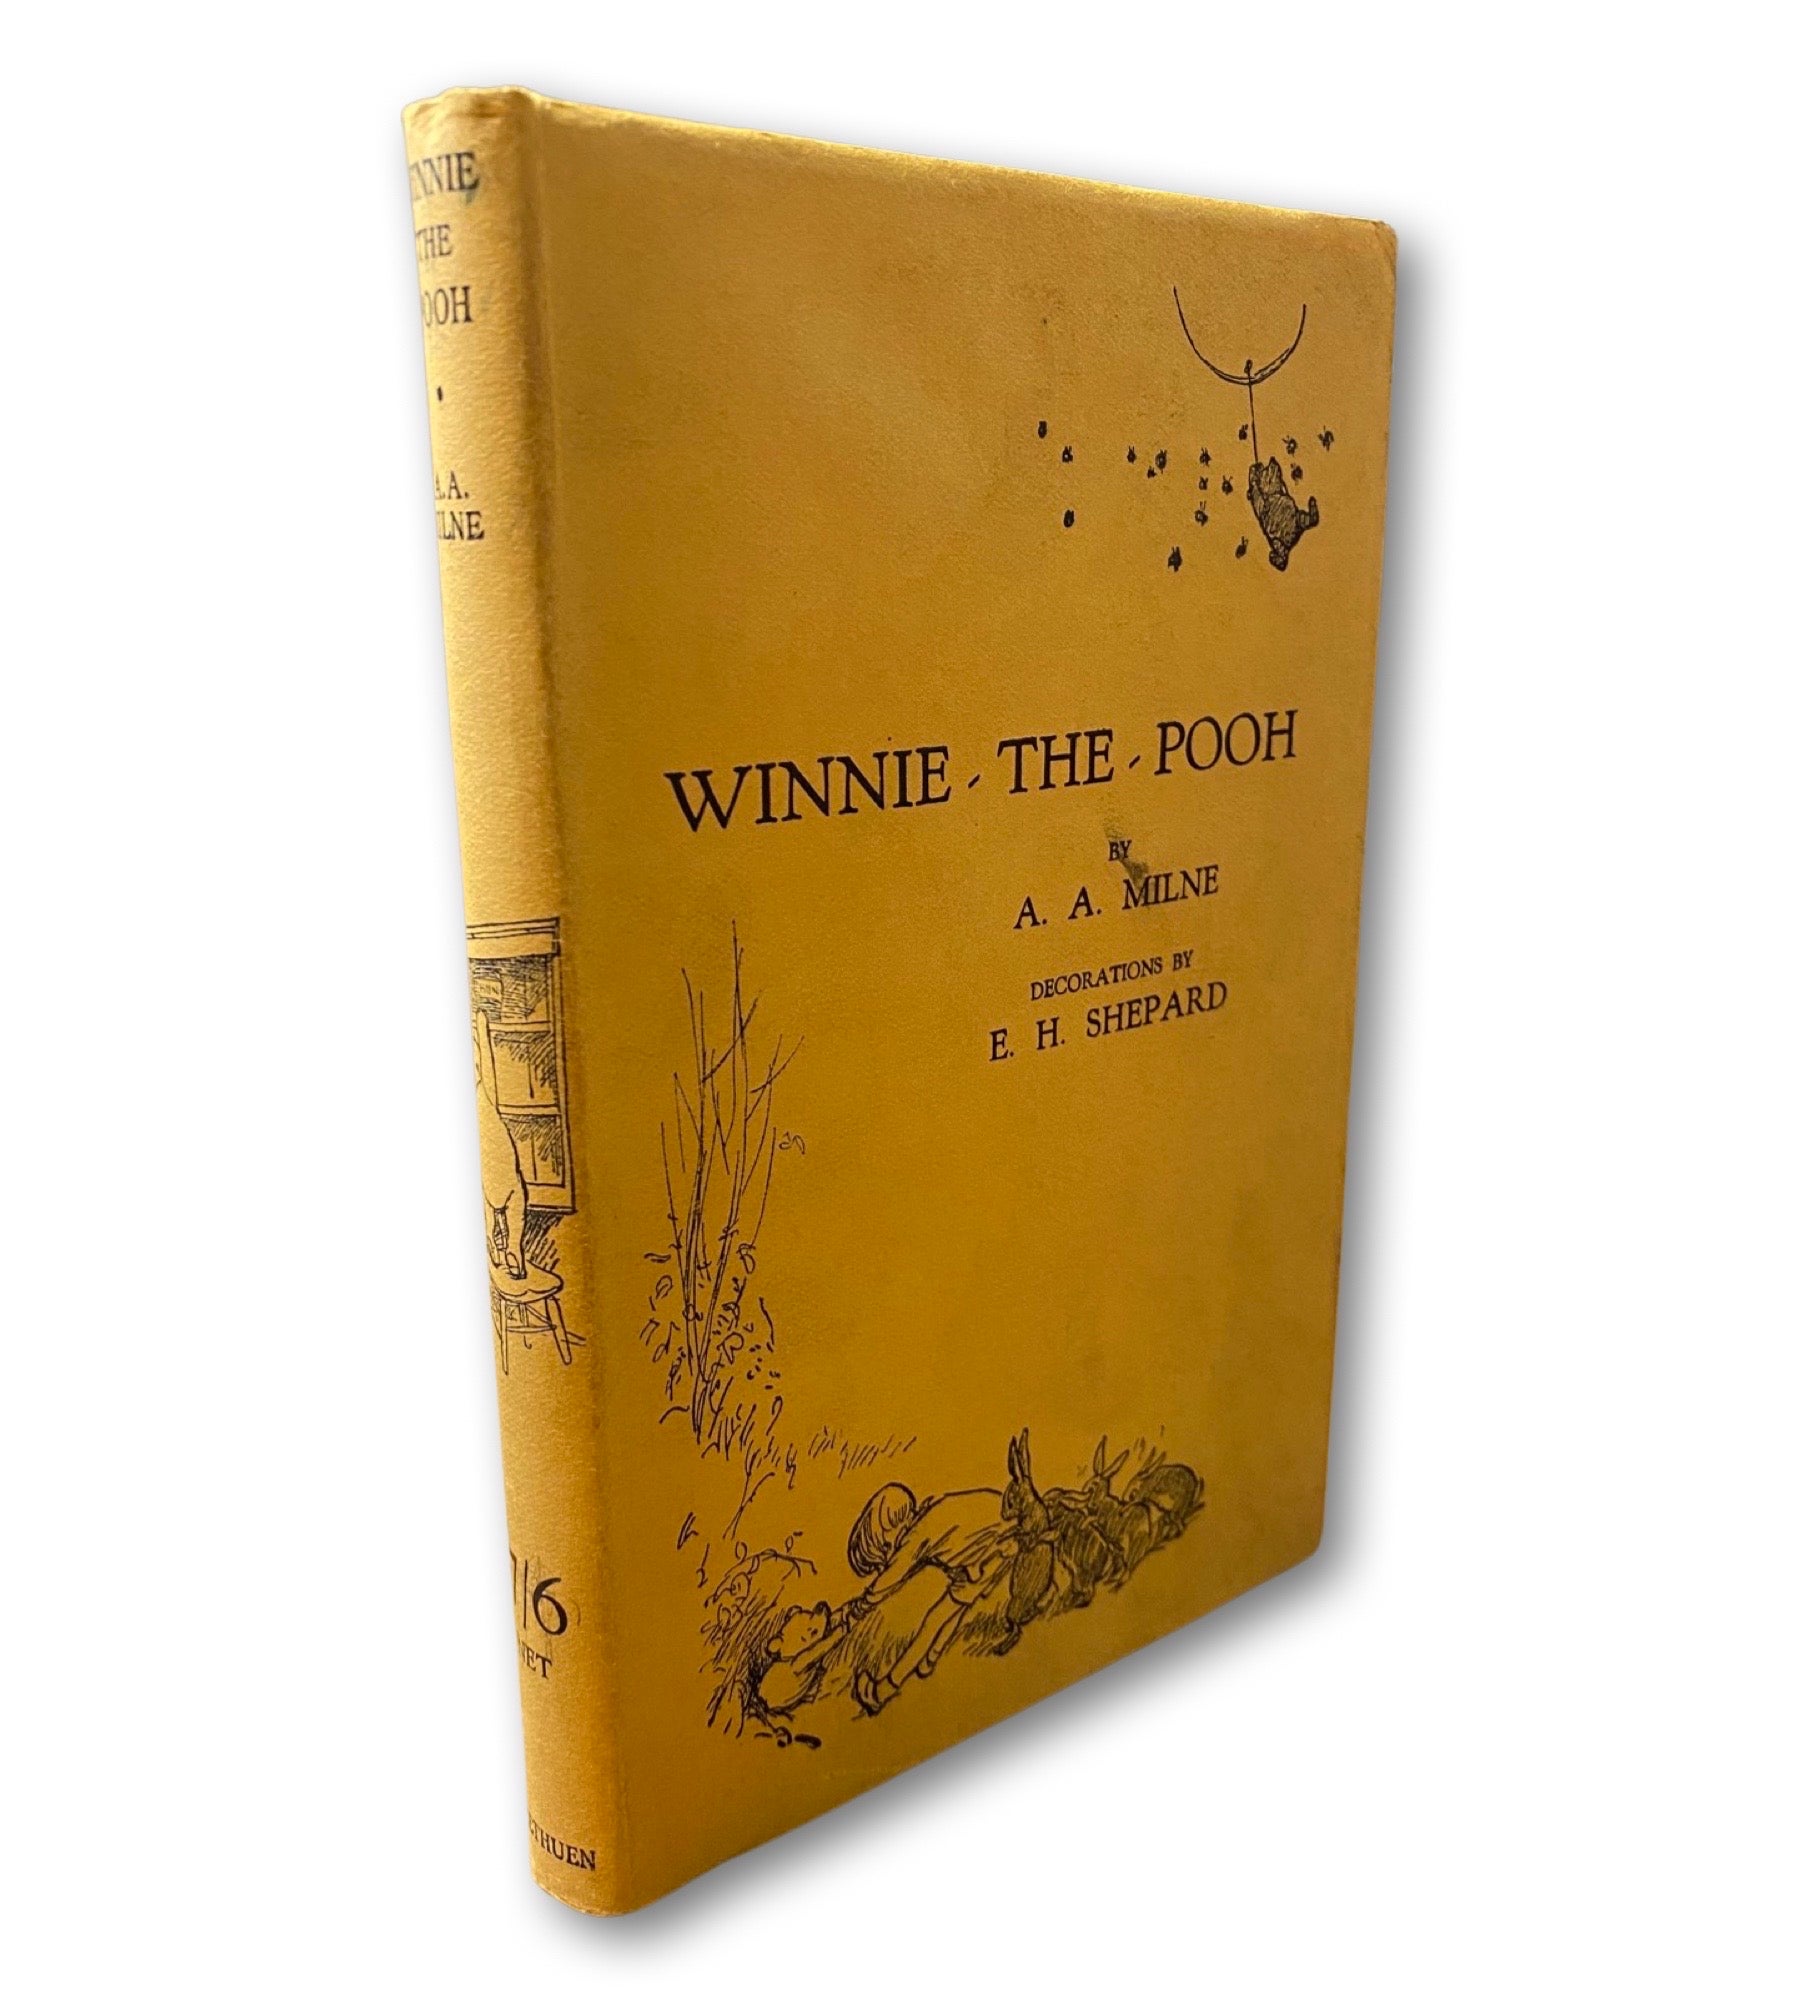 Revisiting Winnie-the-Pooh: more cutting than we thought when we were six, Books